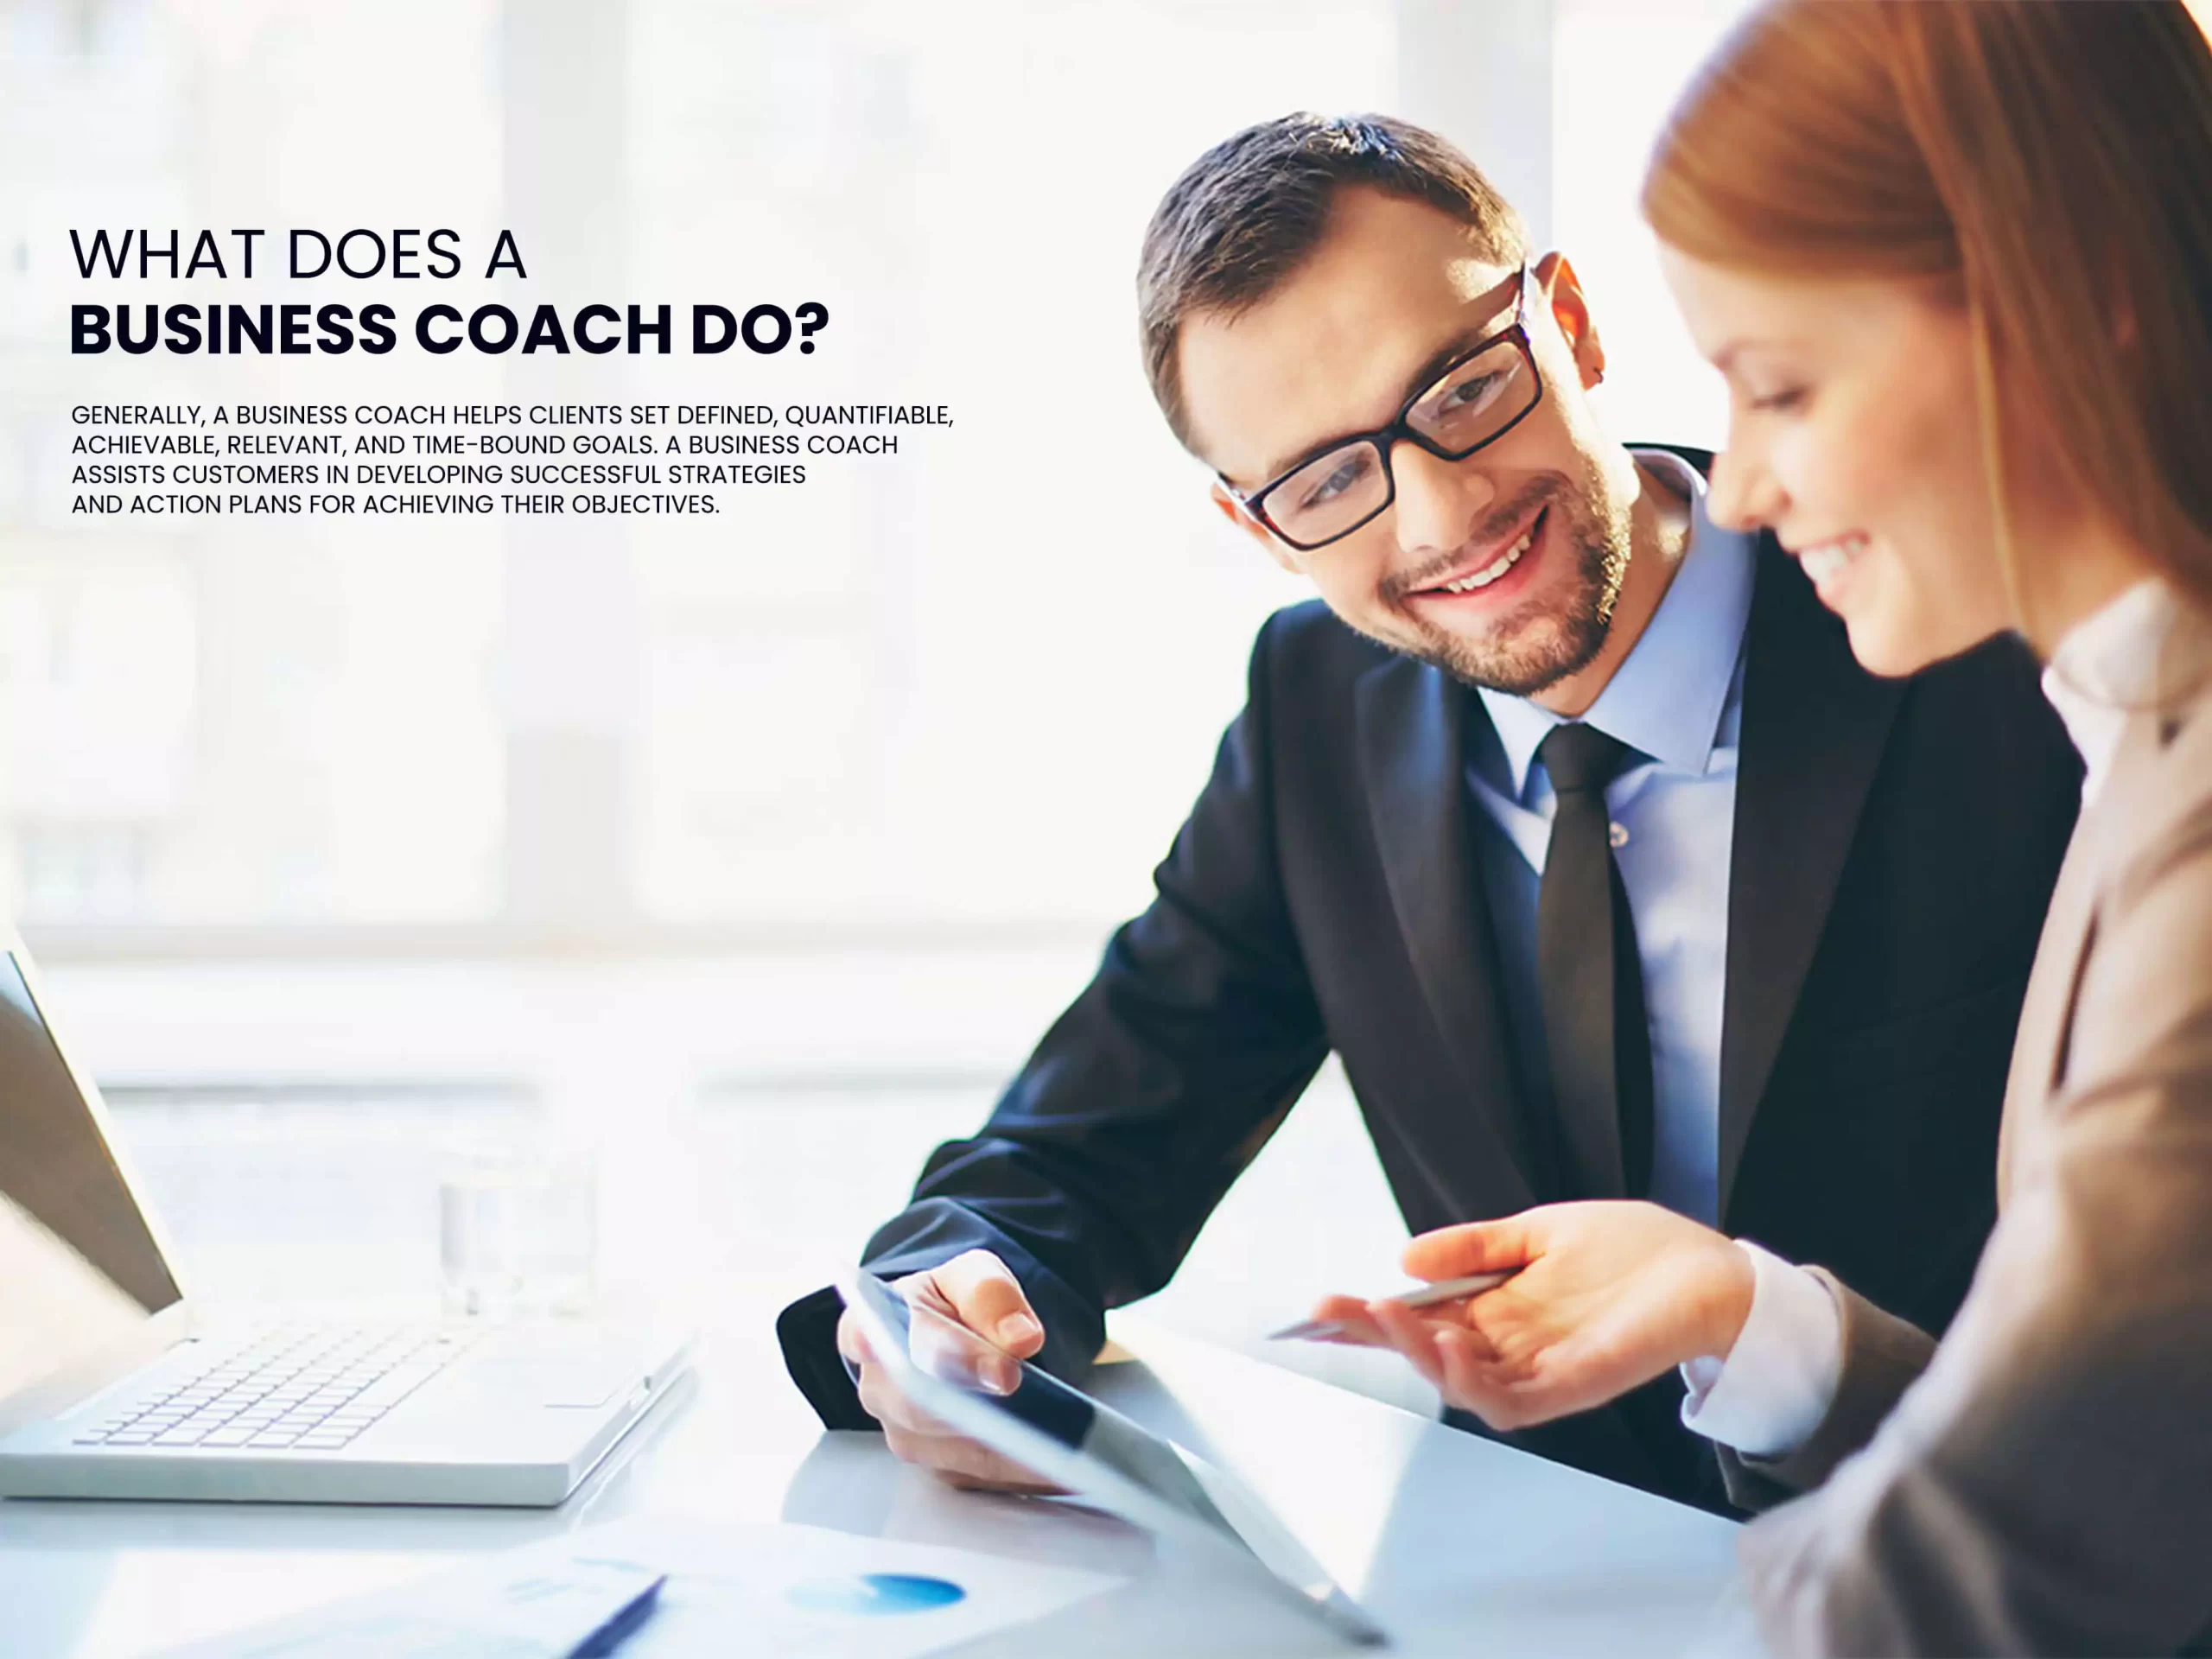 What Does a Business Coach Do?